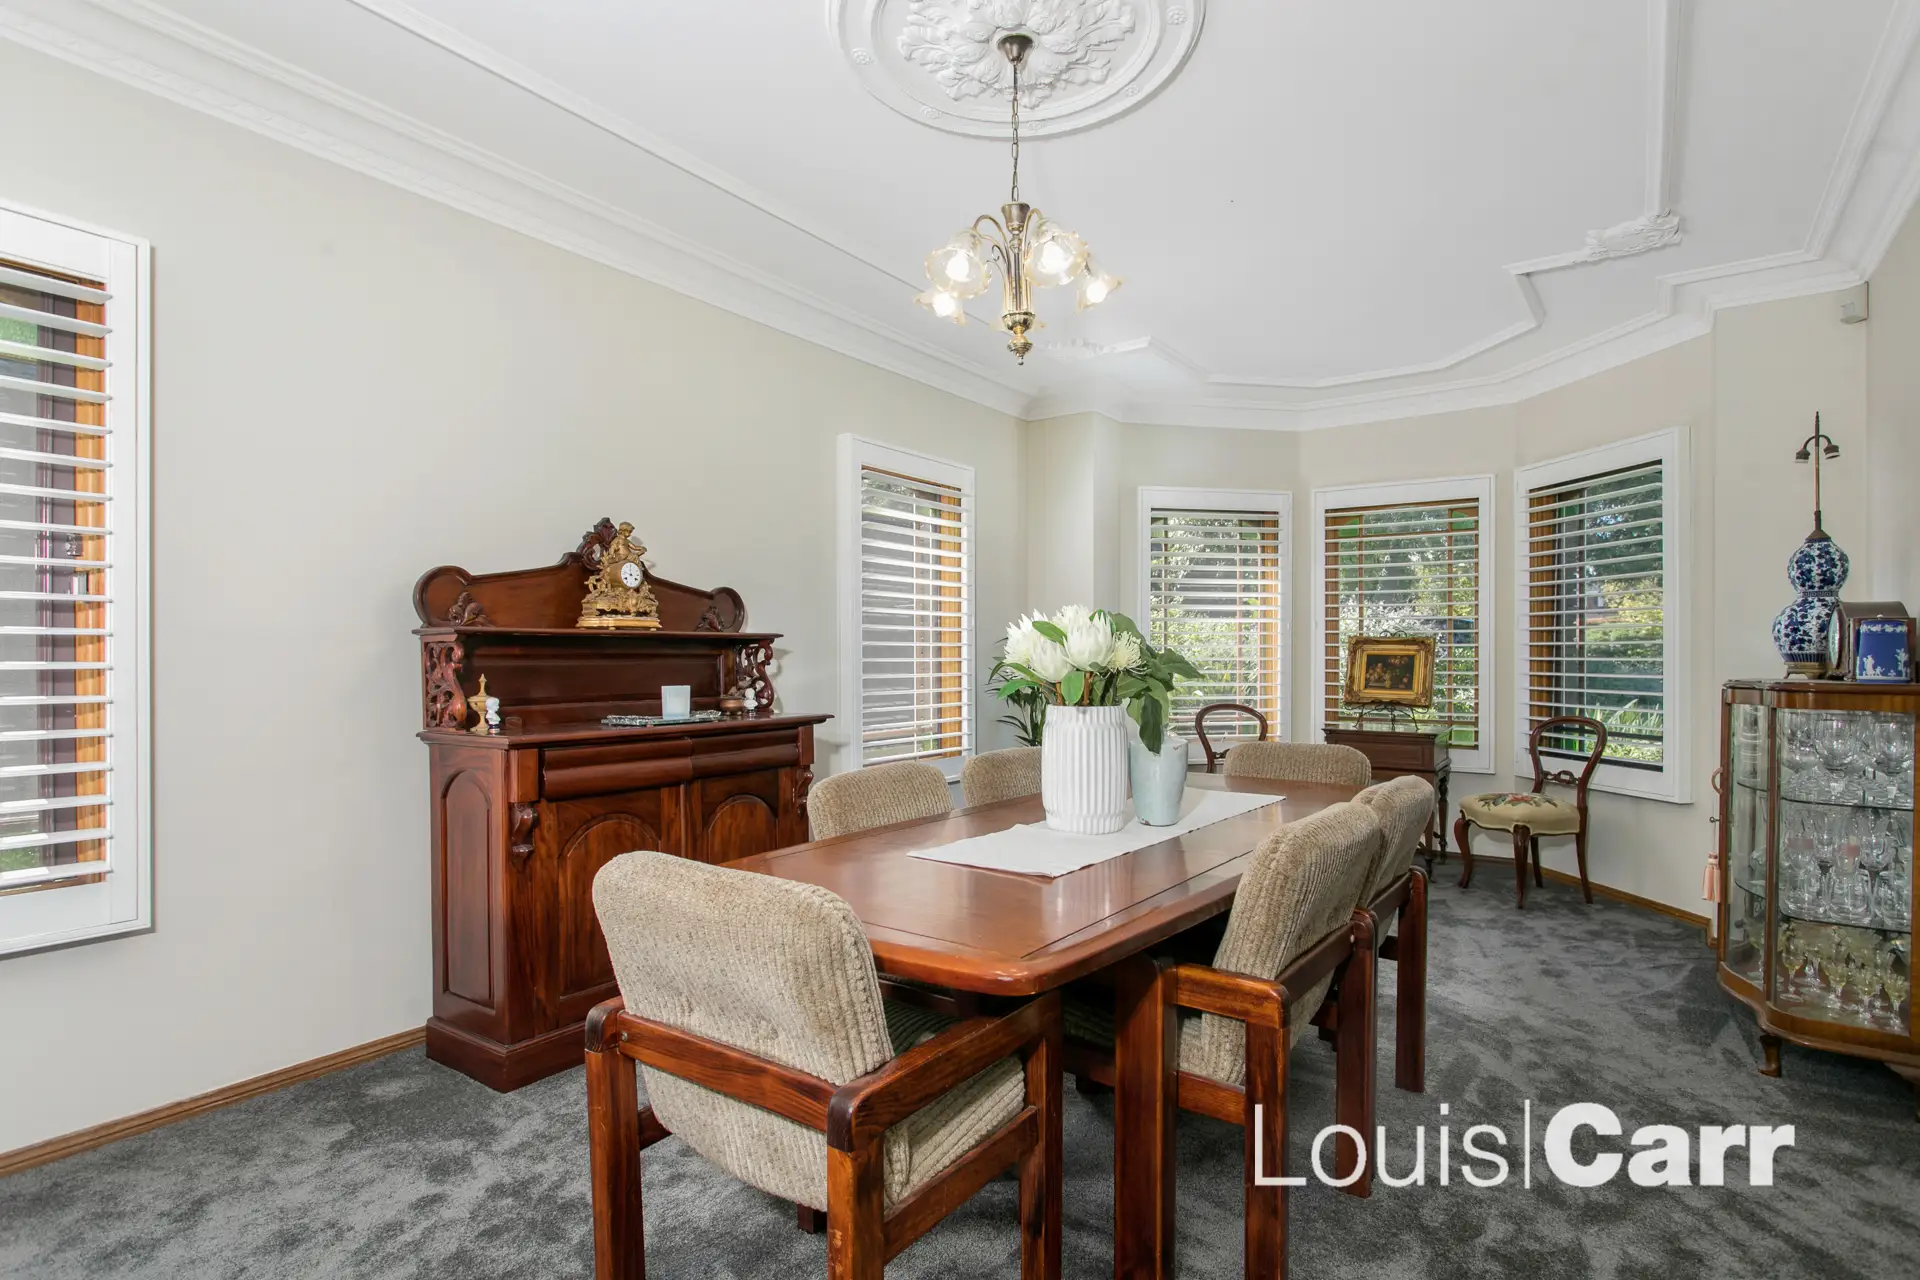 Photo #4: 15 Josephine Crescent, Cherrybrook - Sold by Louis Carr Real Estate